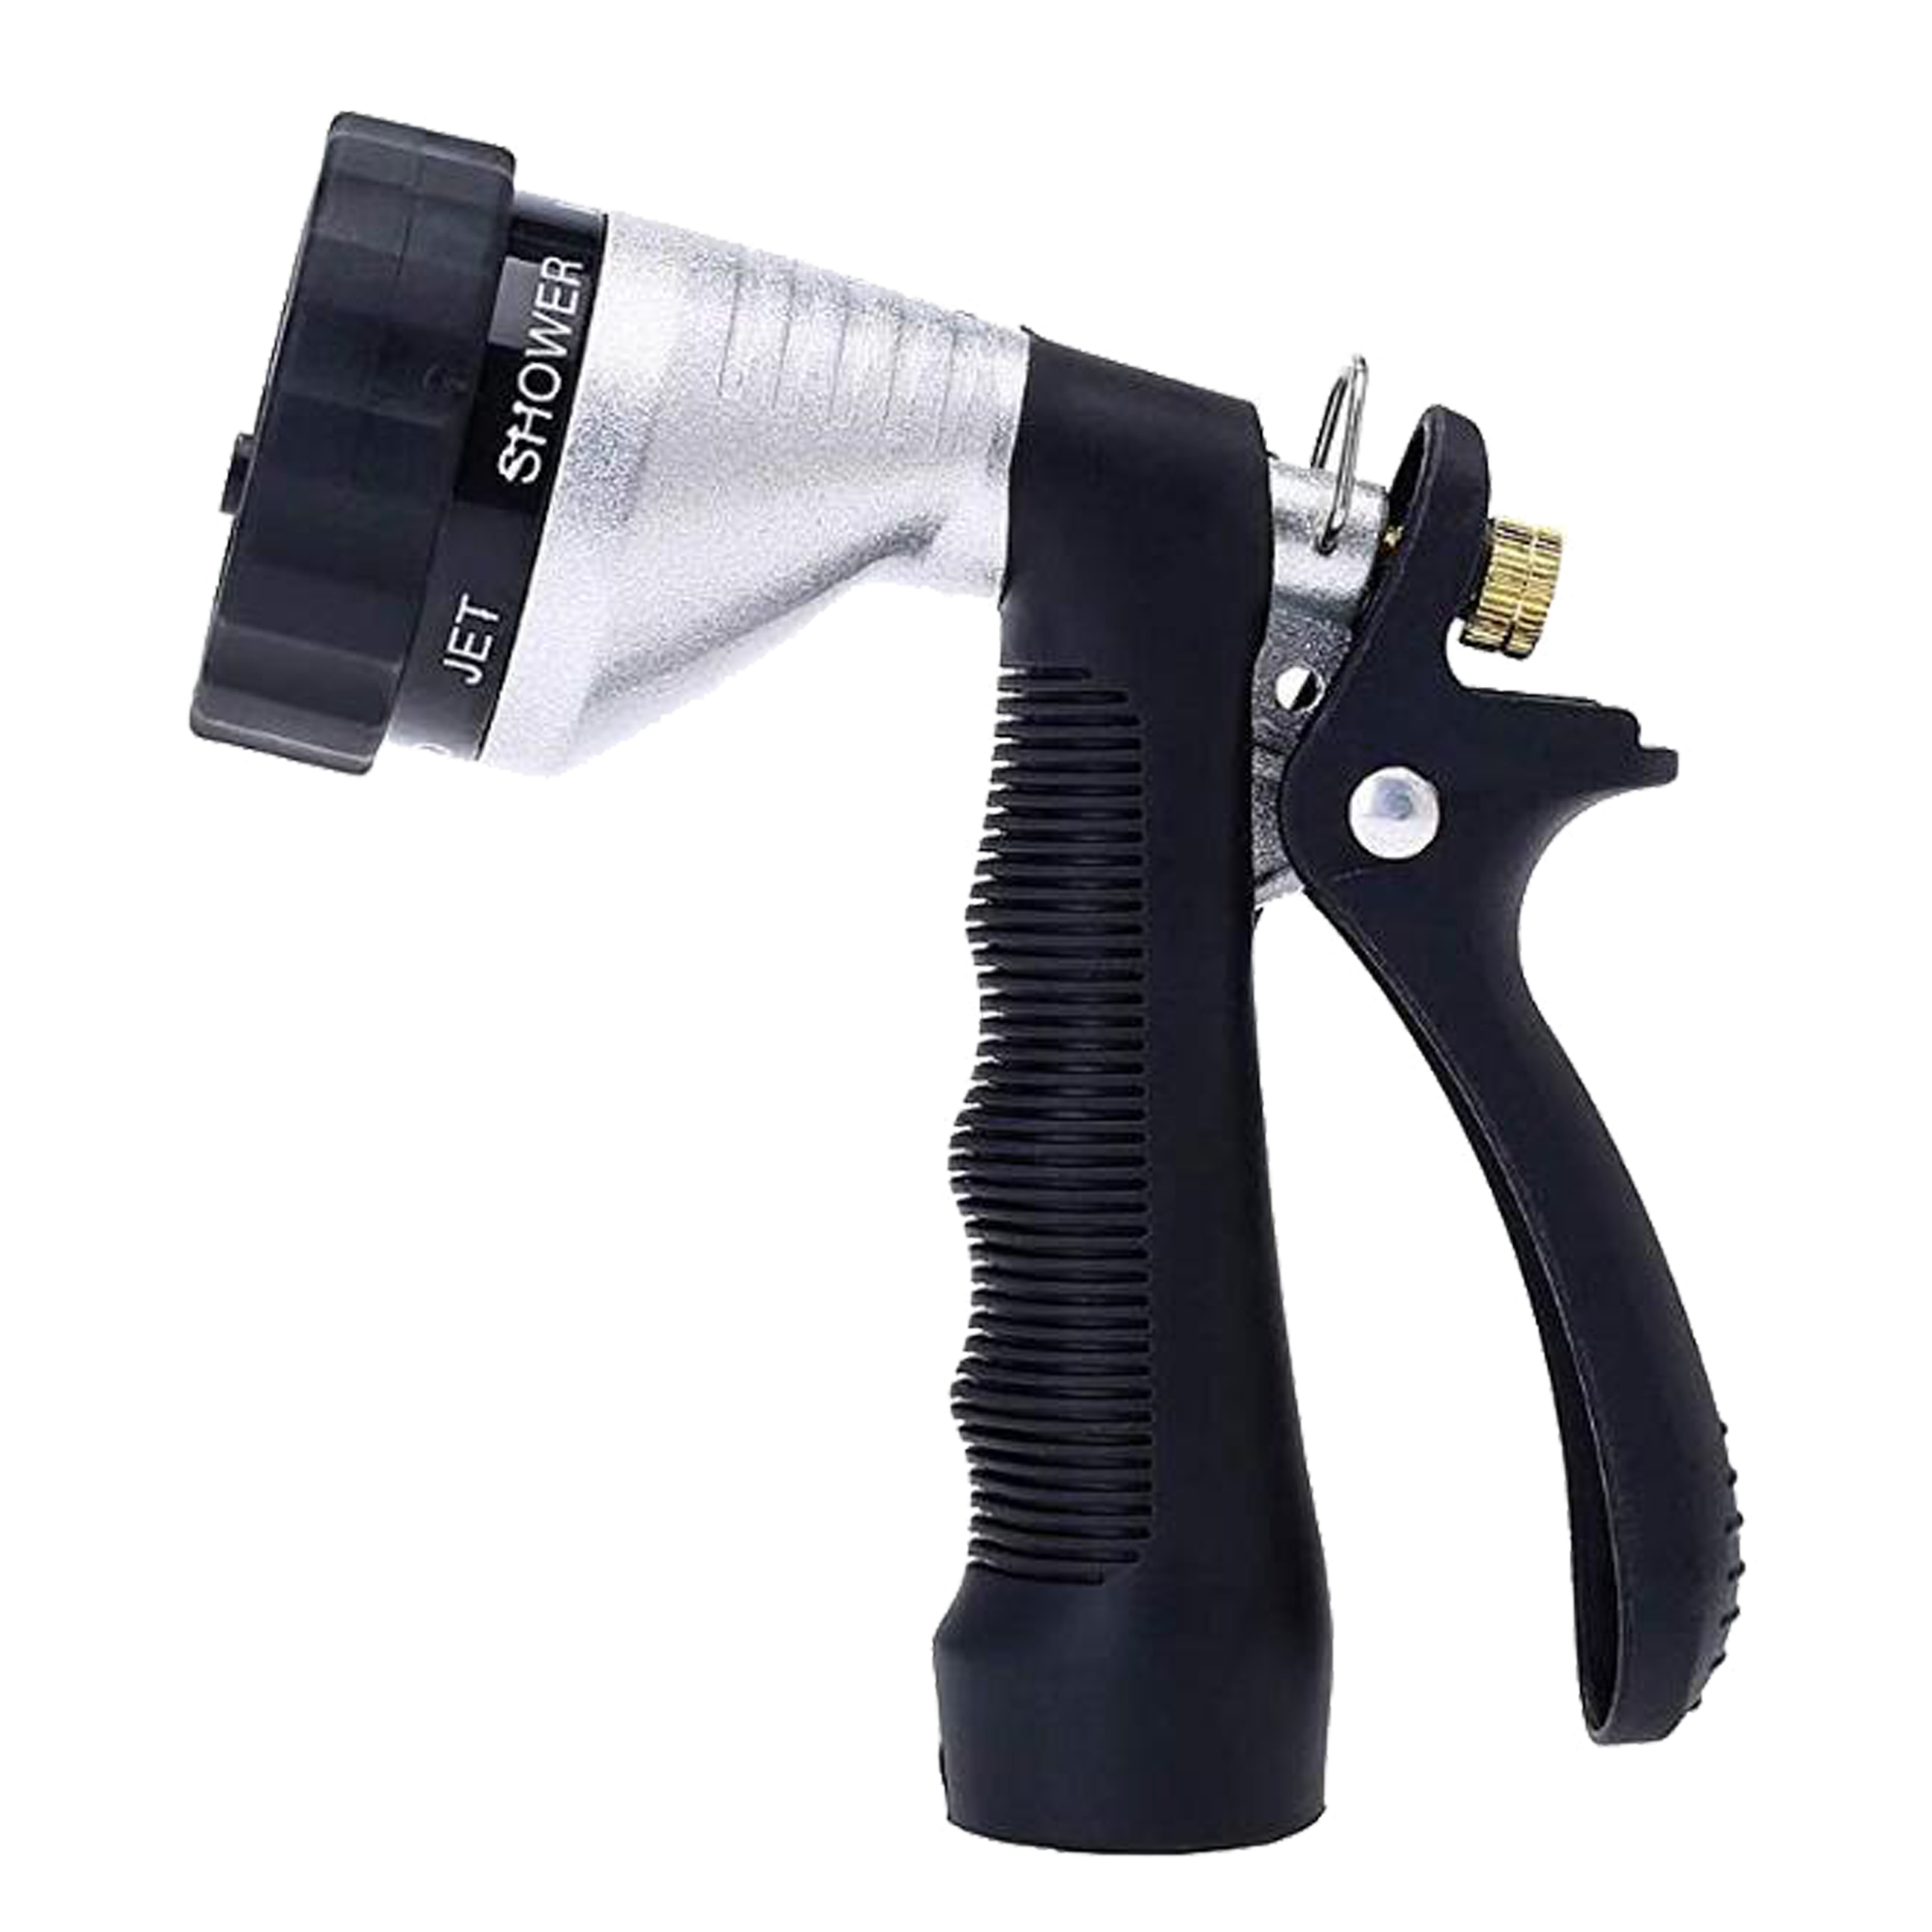 GREEN MOUNT Metal Garden Hose Nozzle with Adjustable Spray Patterns (S